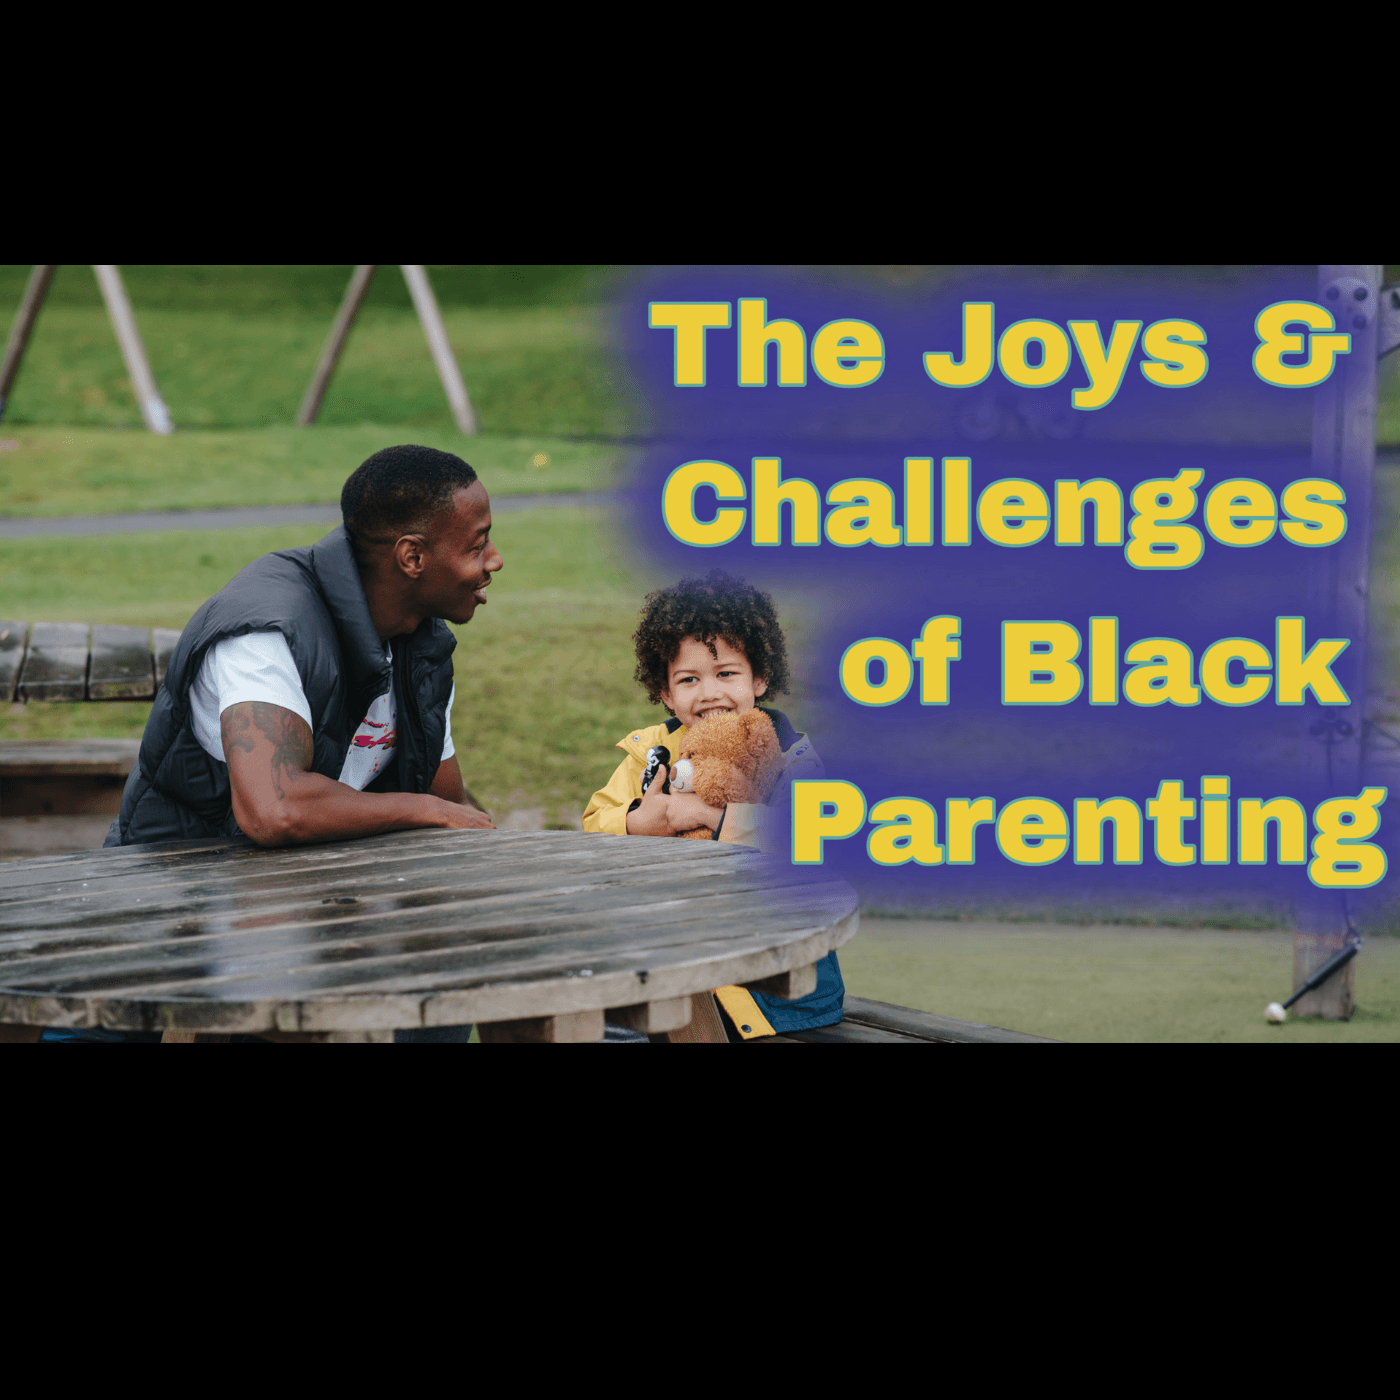 Thumbnail for "Black Parenting: The joys and challenges".